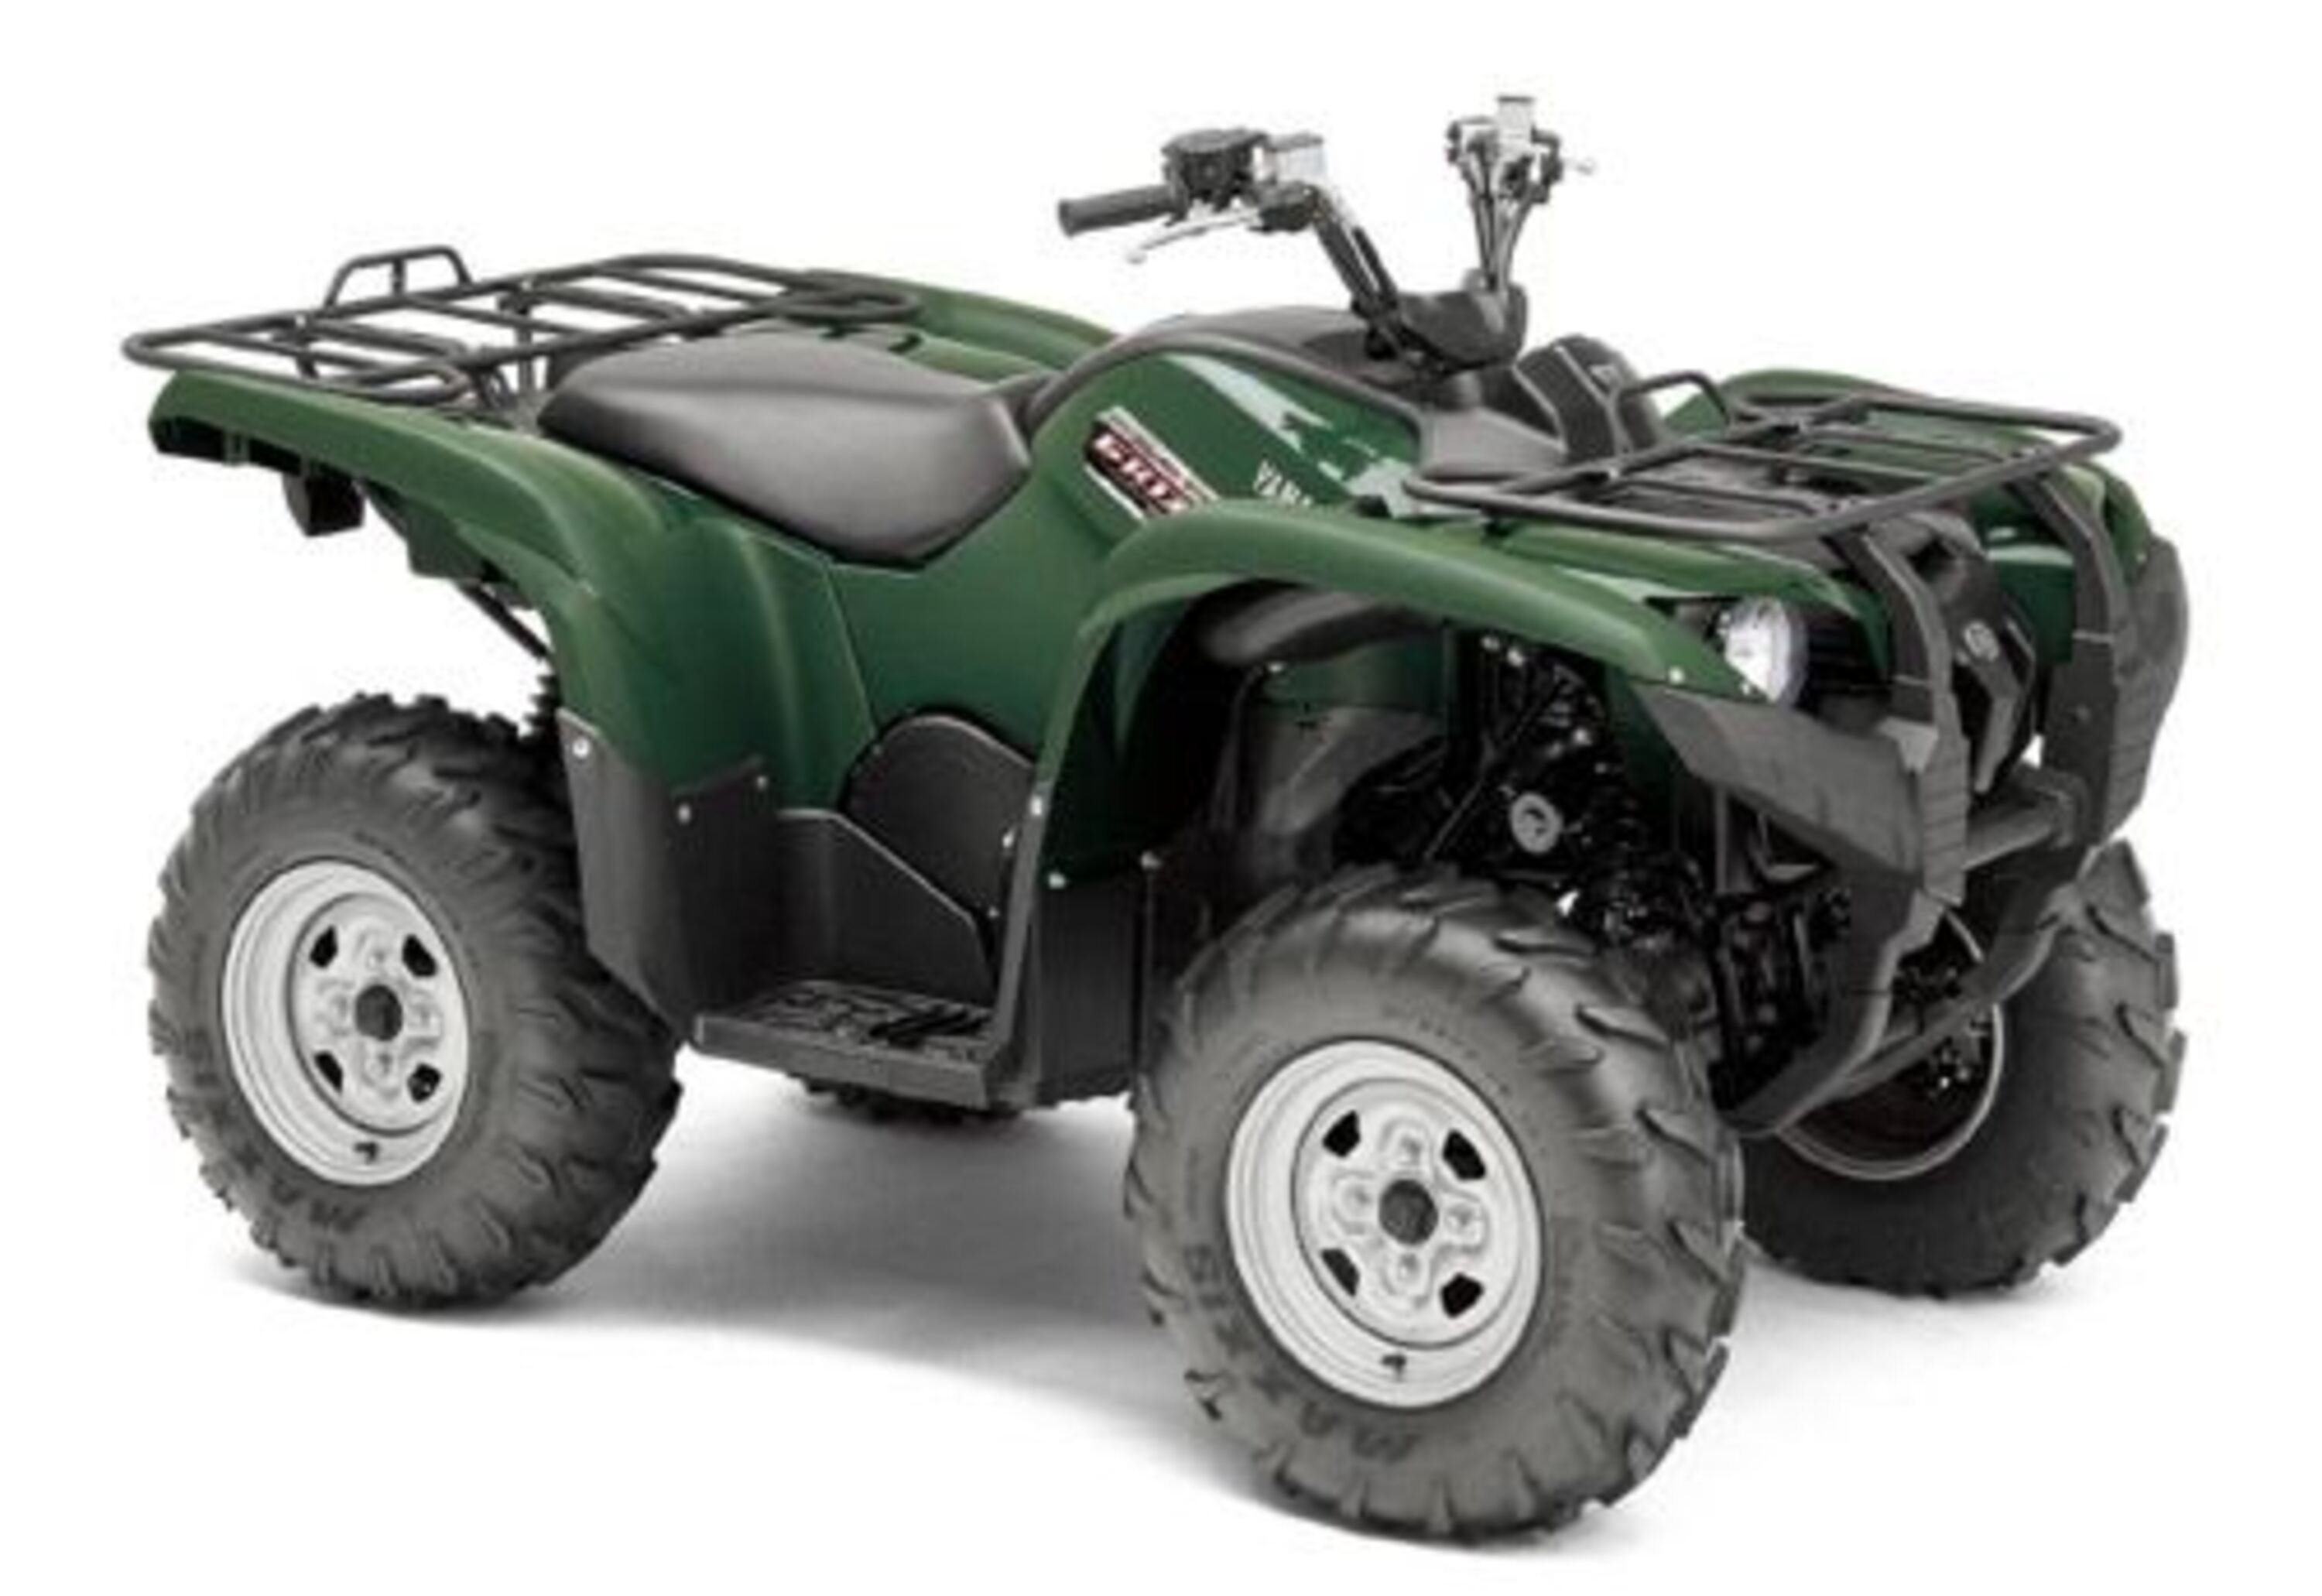 Yamaha Grizzly 550 Grizzly 550 (2007 - 13)